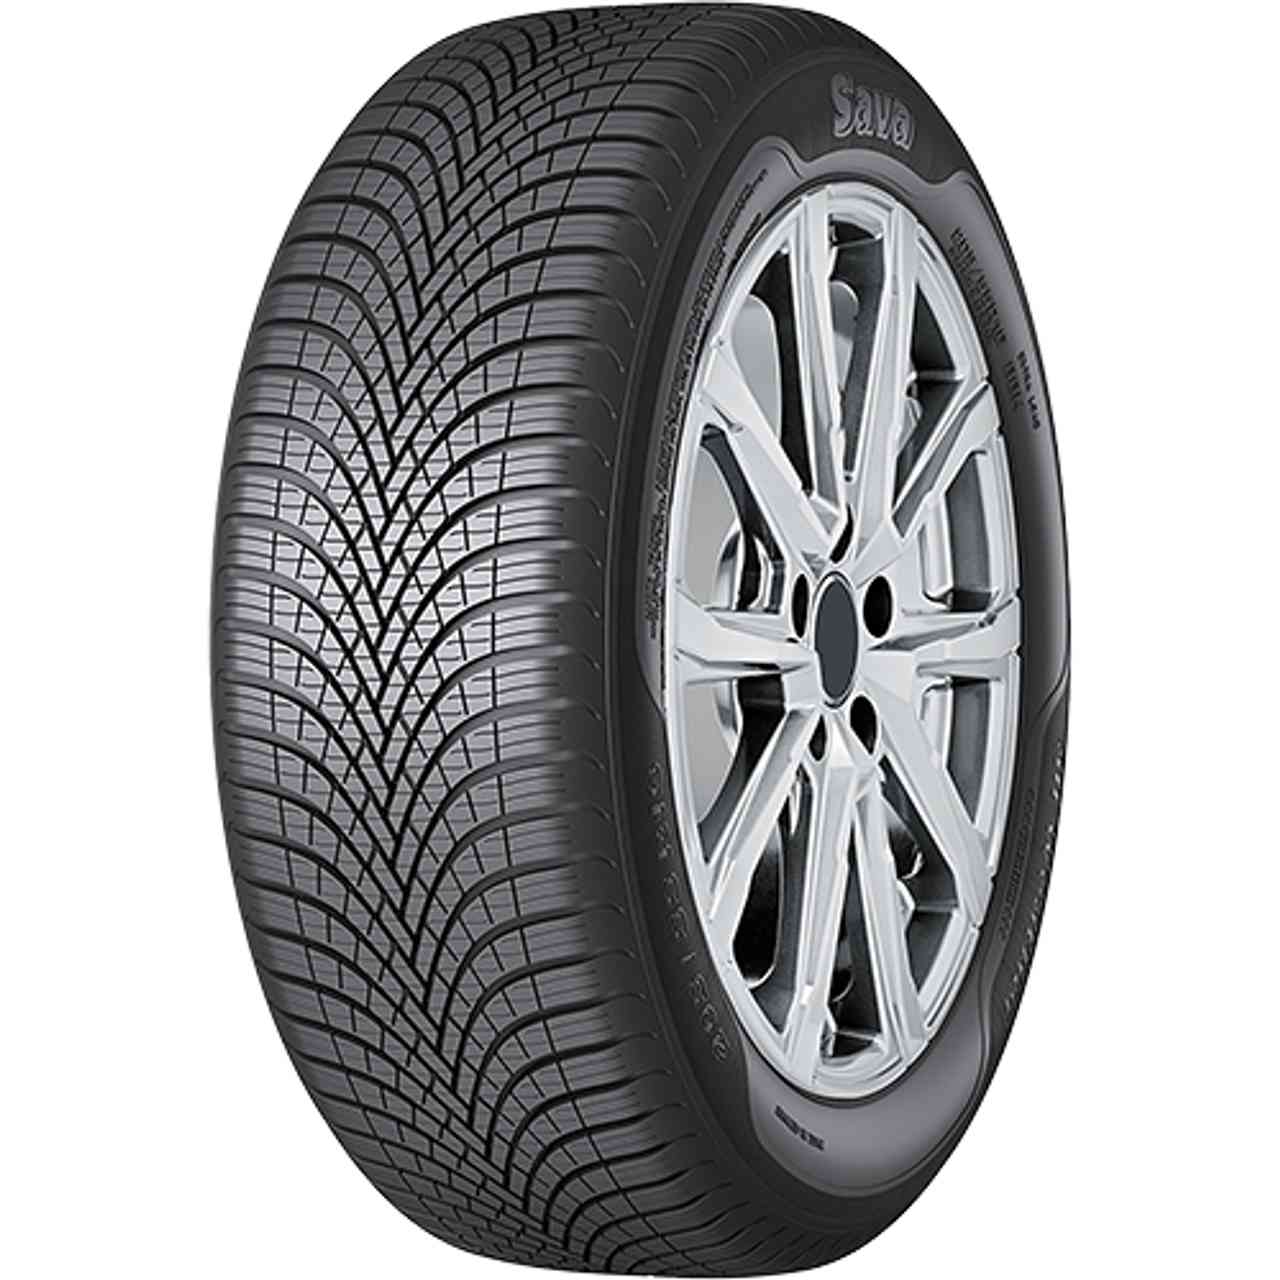 SAVA ALL WEATHER 235/55R17 103V BSW